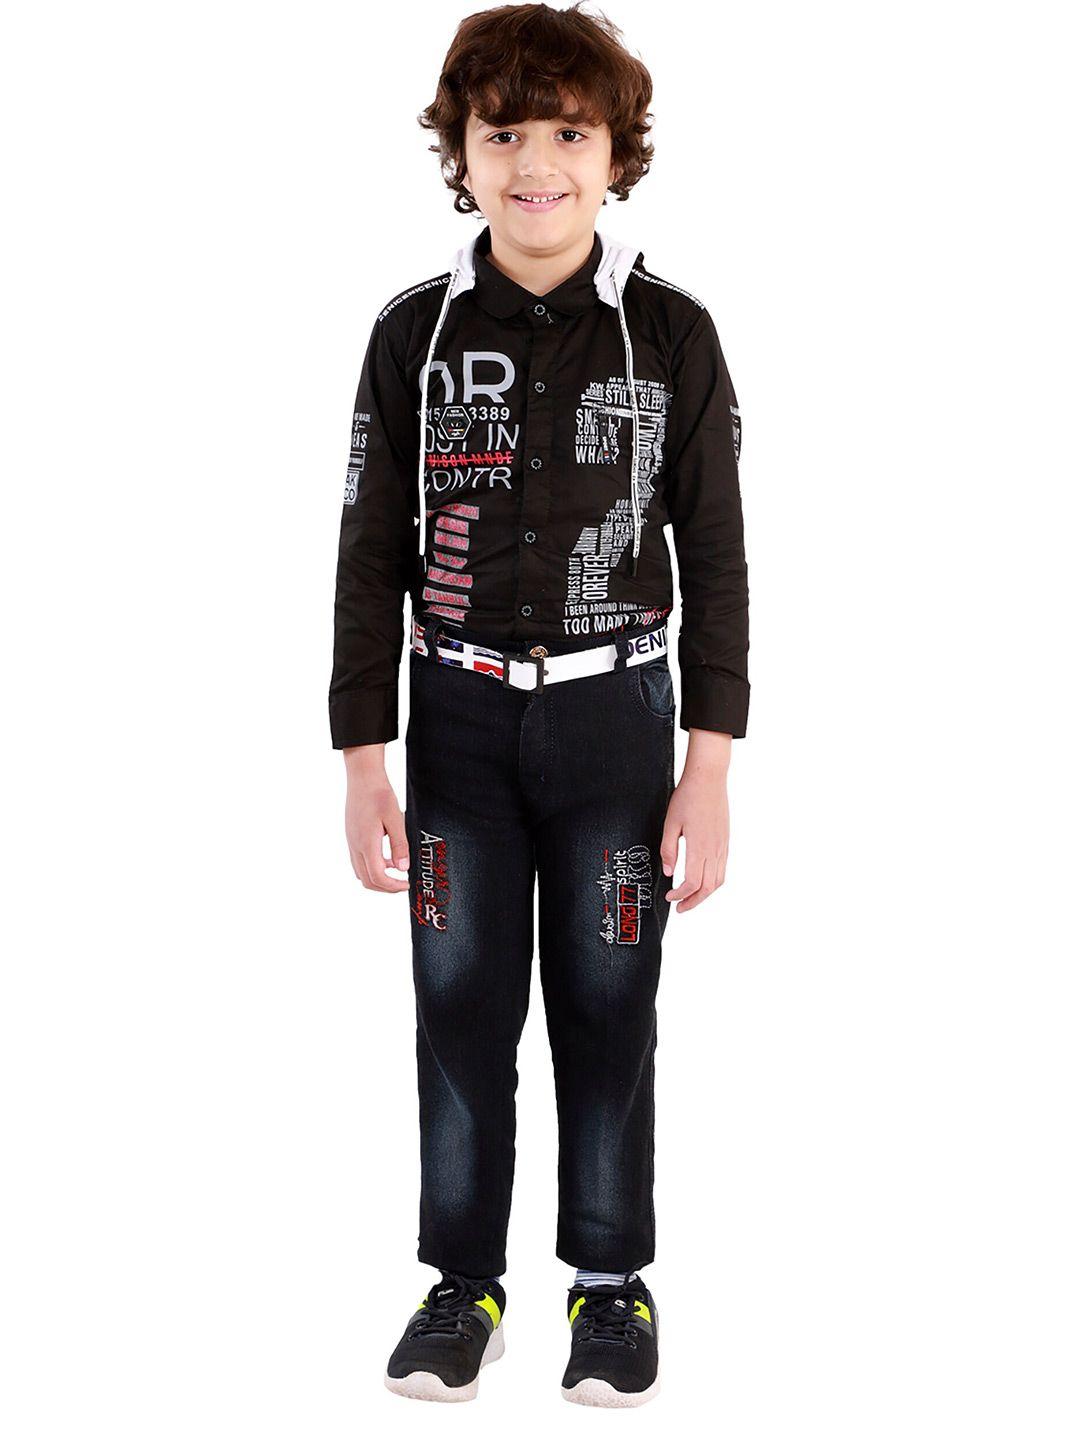 fourfolds-boys-black-&-white-printed-shirt-with-trousers